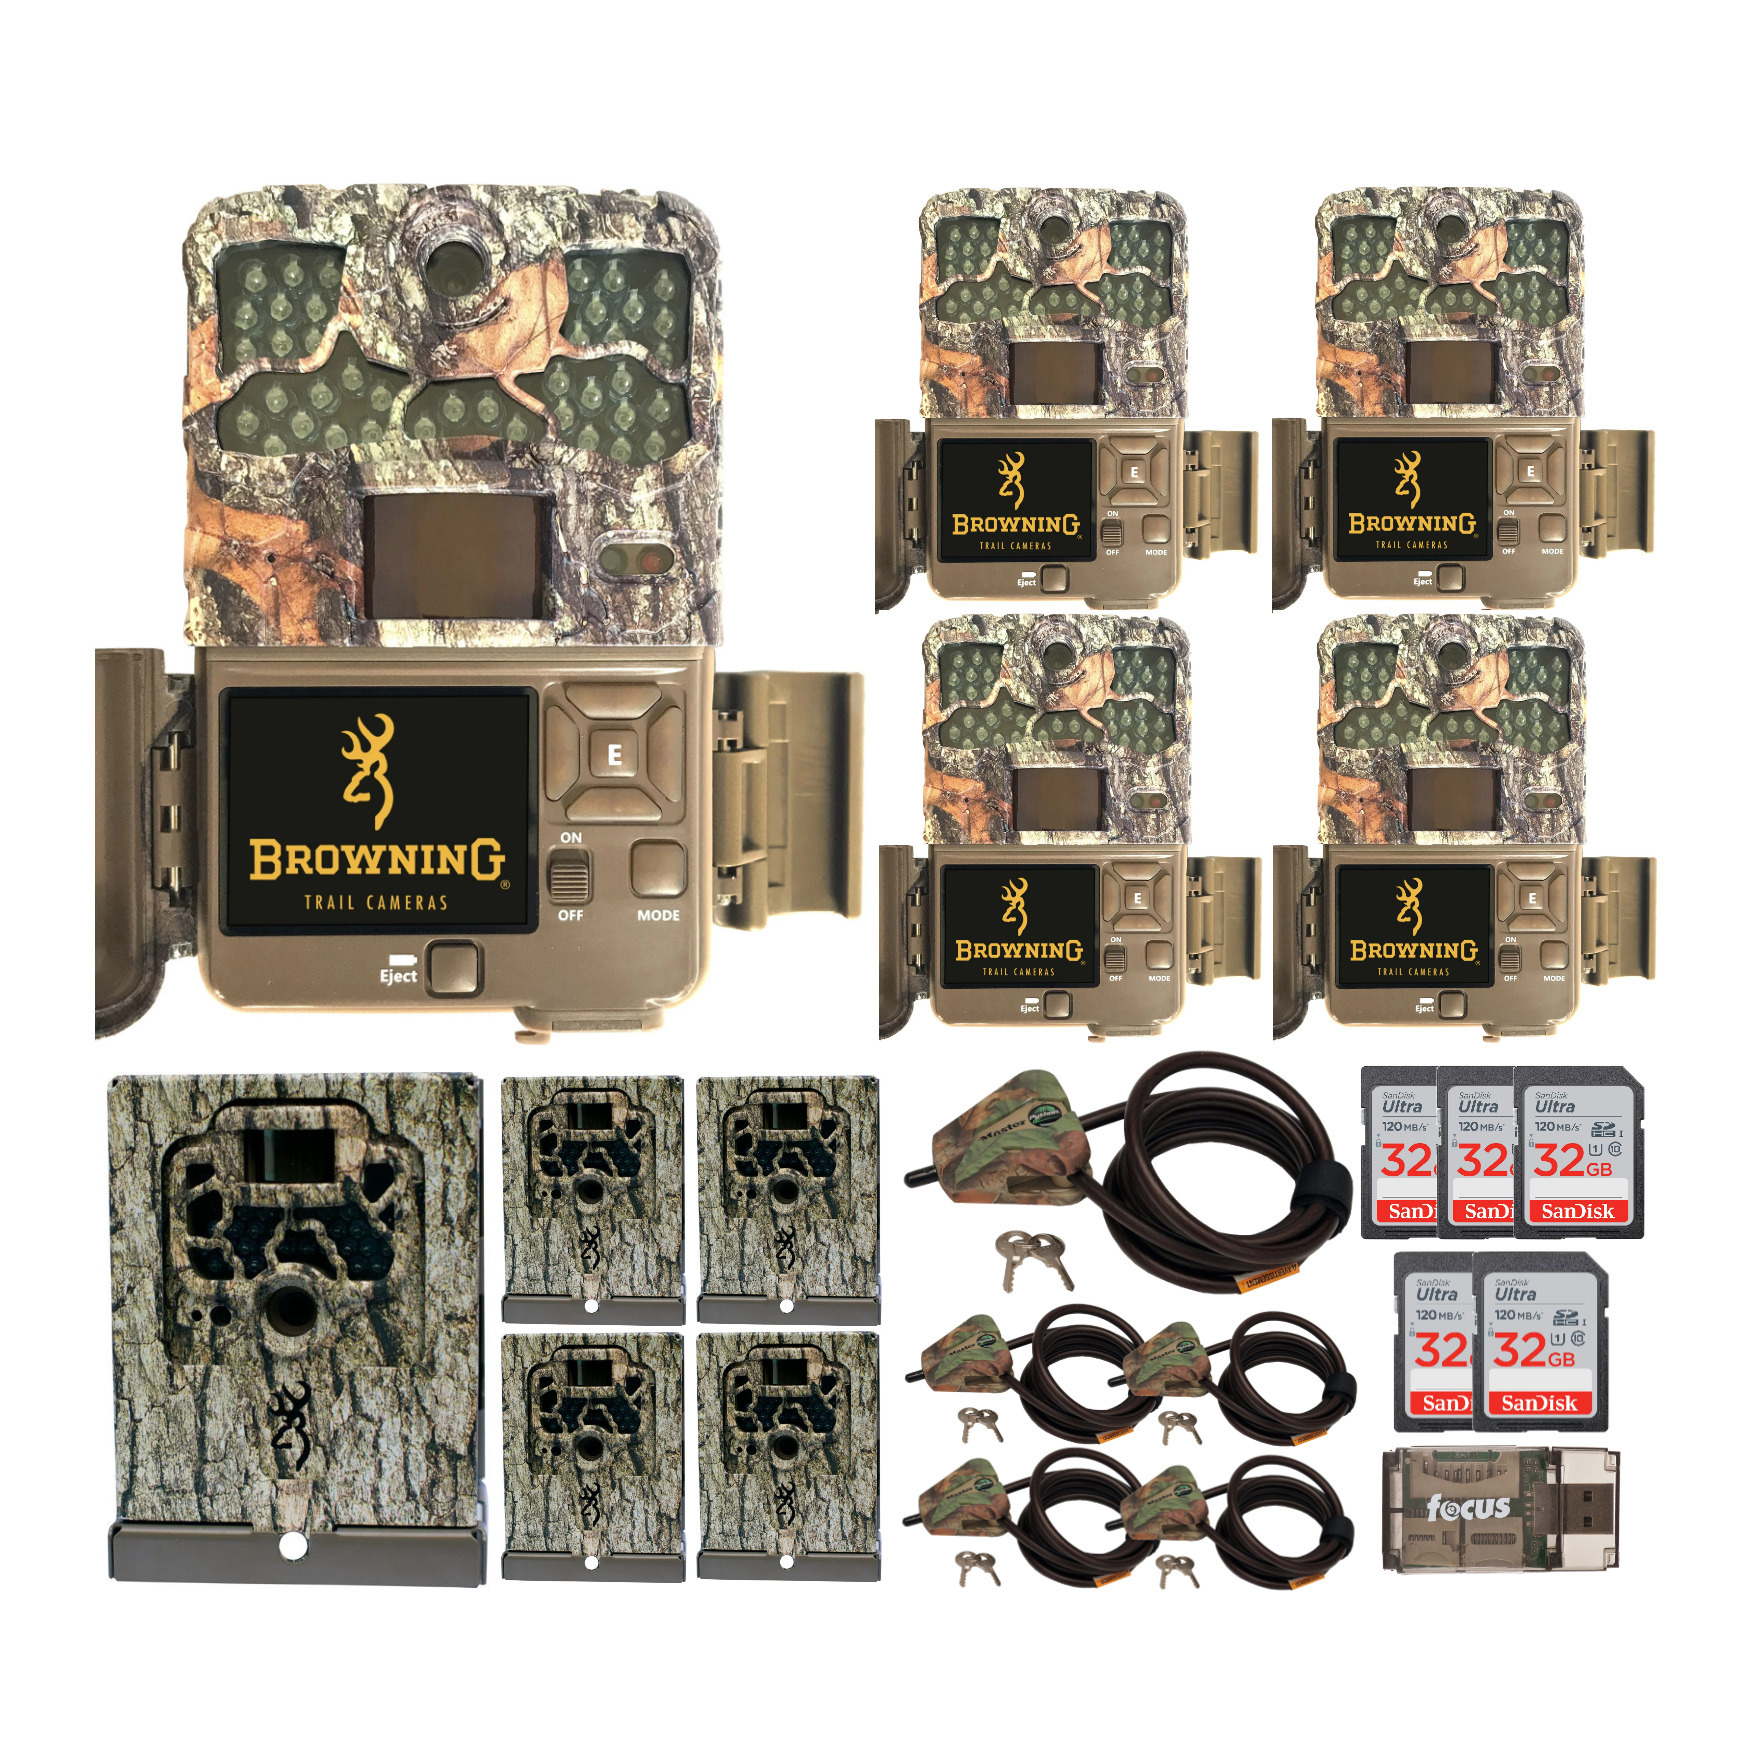 Browning Trail Cameras Recon Force Edge Trail Camera (5-Pk) w/ Security Bundle - image 1 of 8